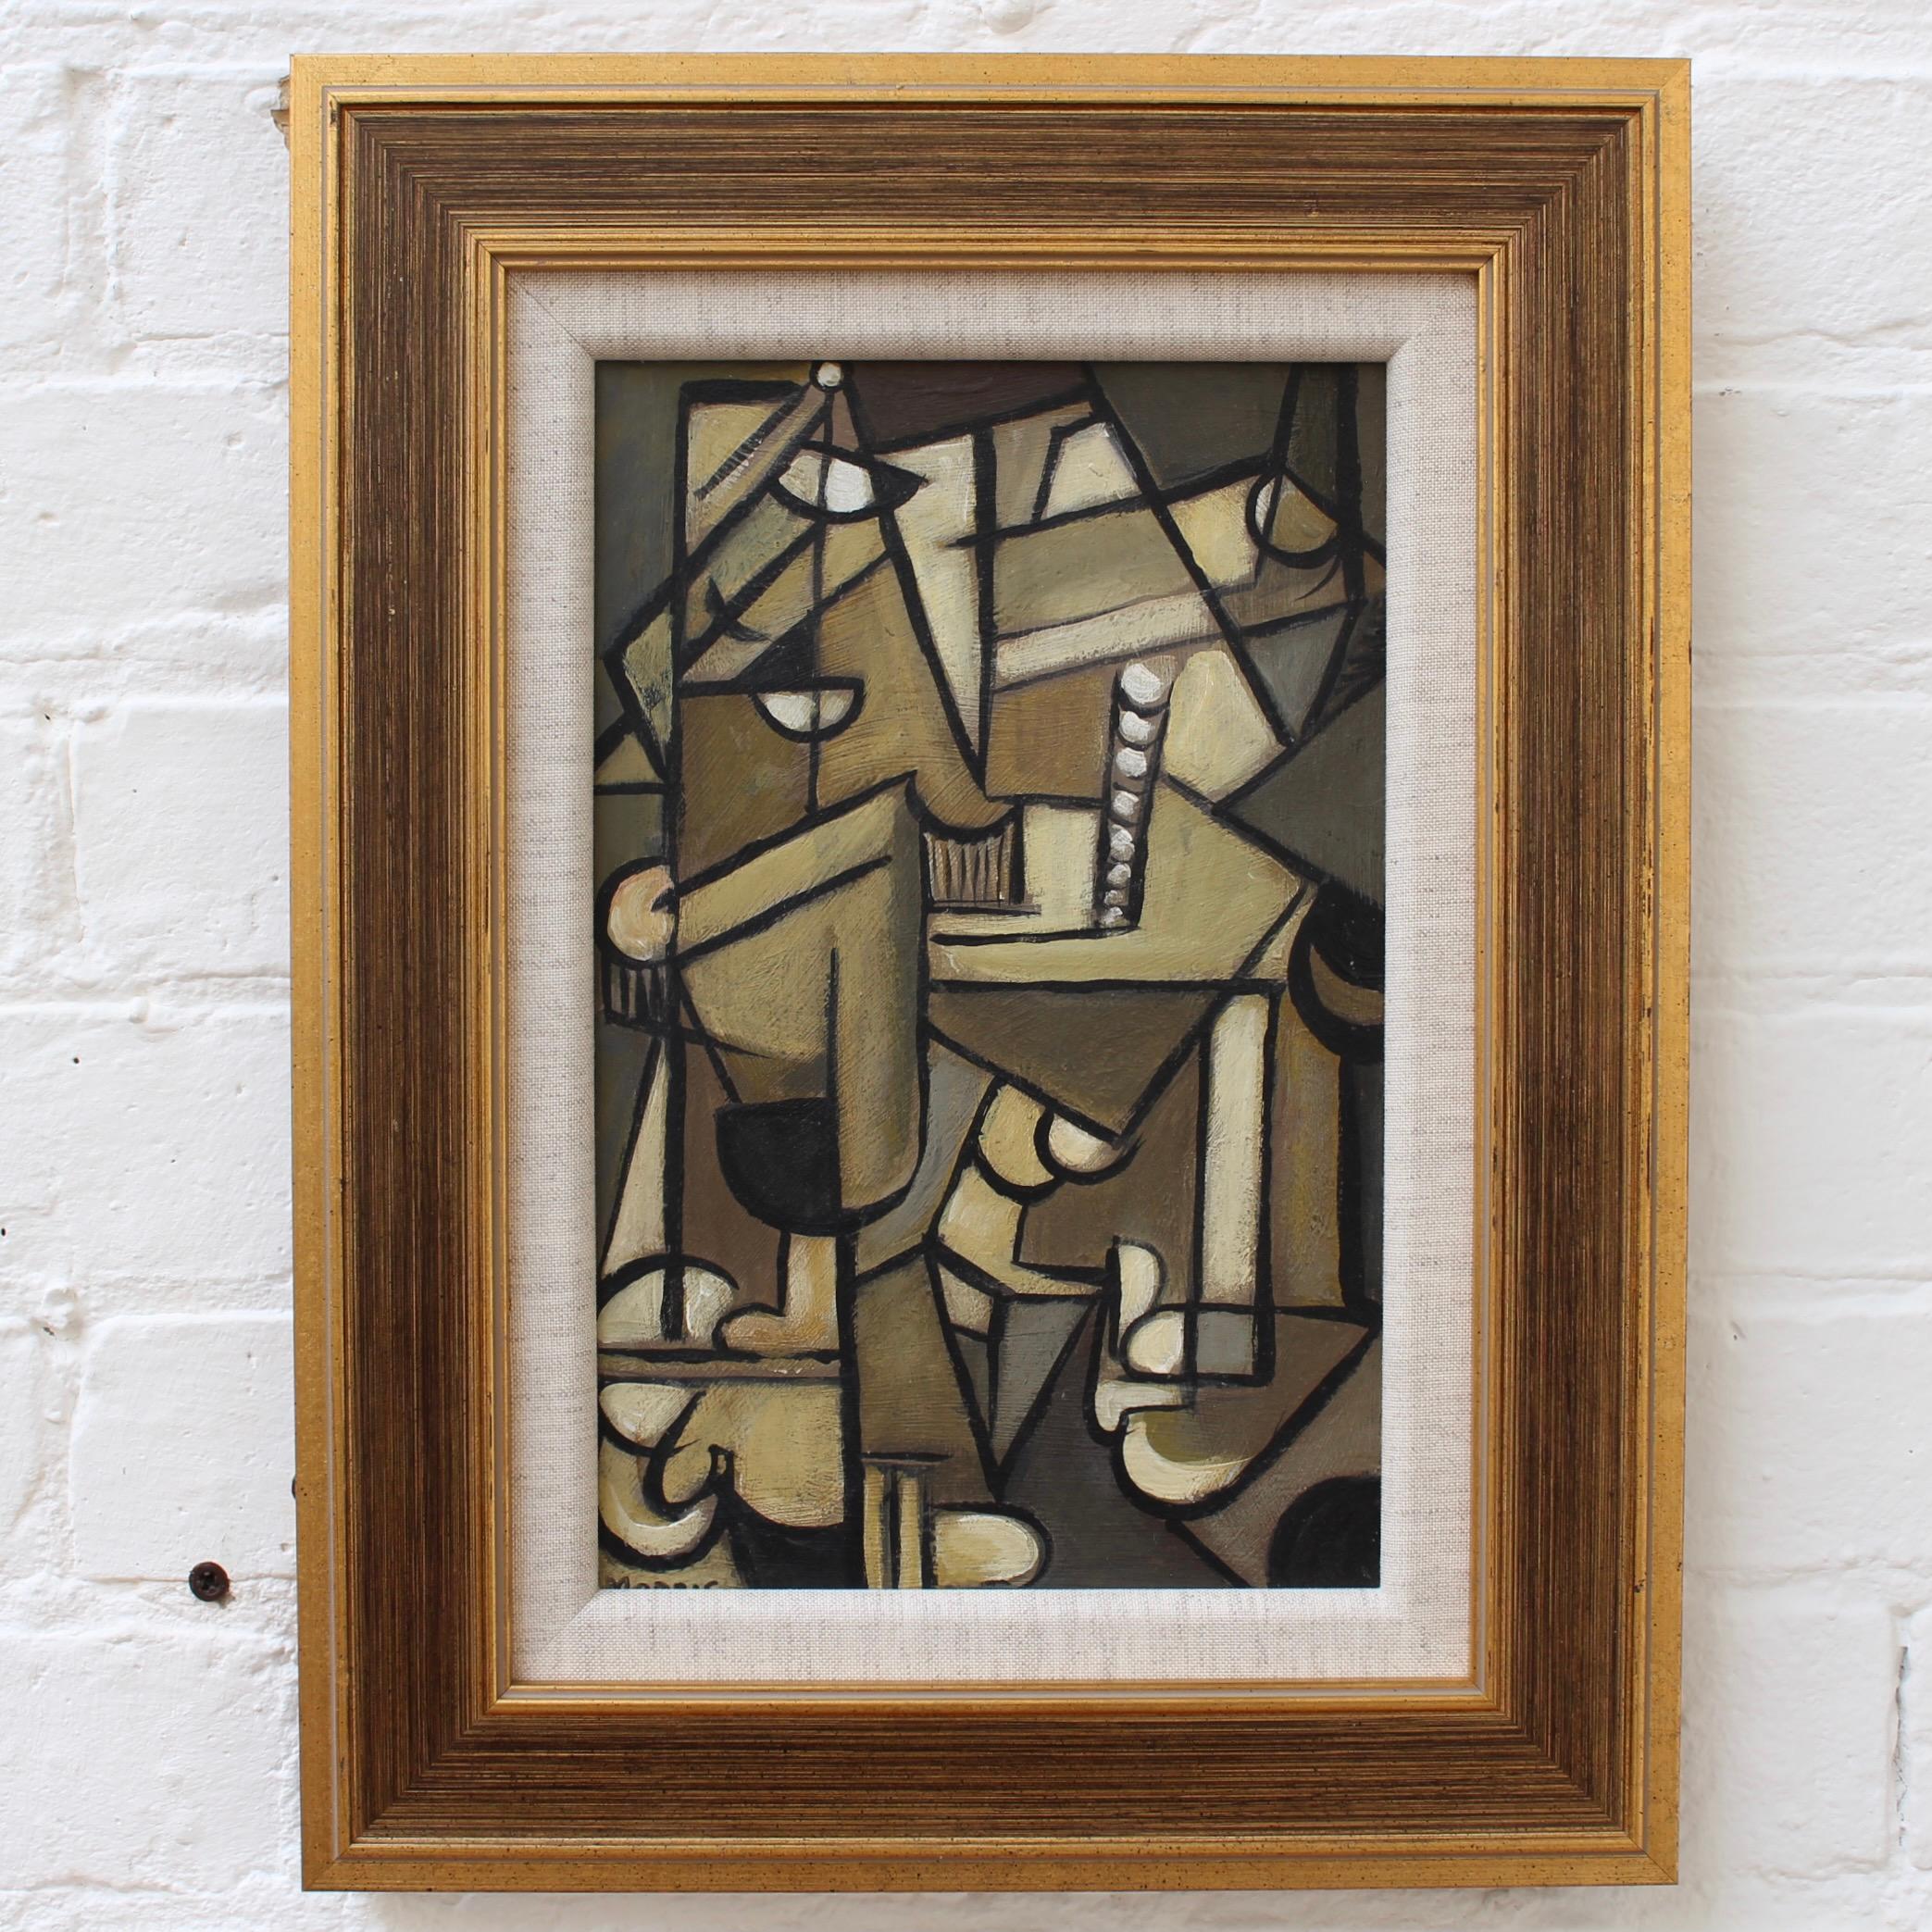 'Arrangement in Cubism' School of Berlin - Painting by Unknown